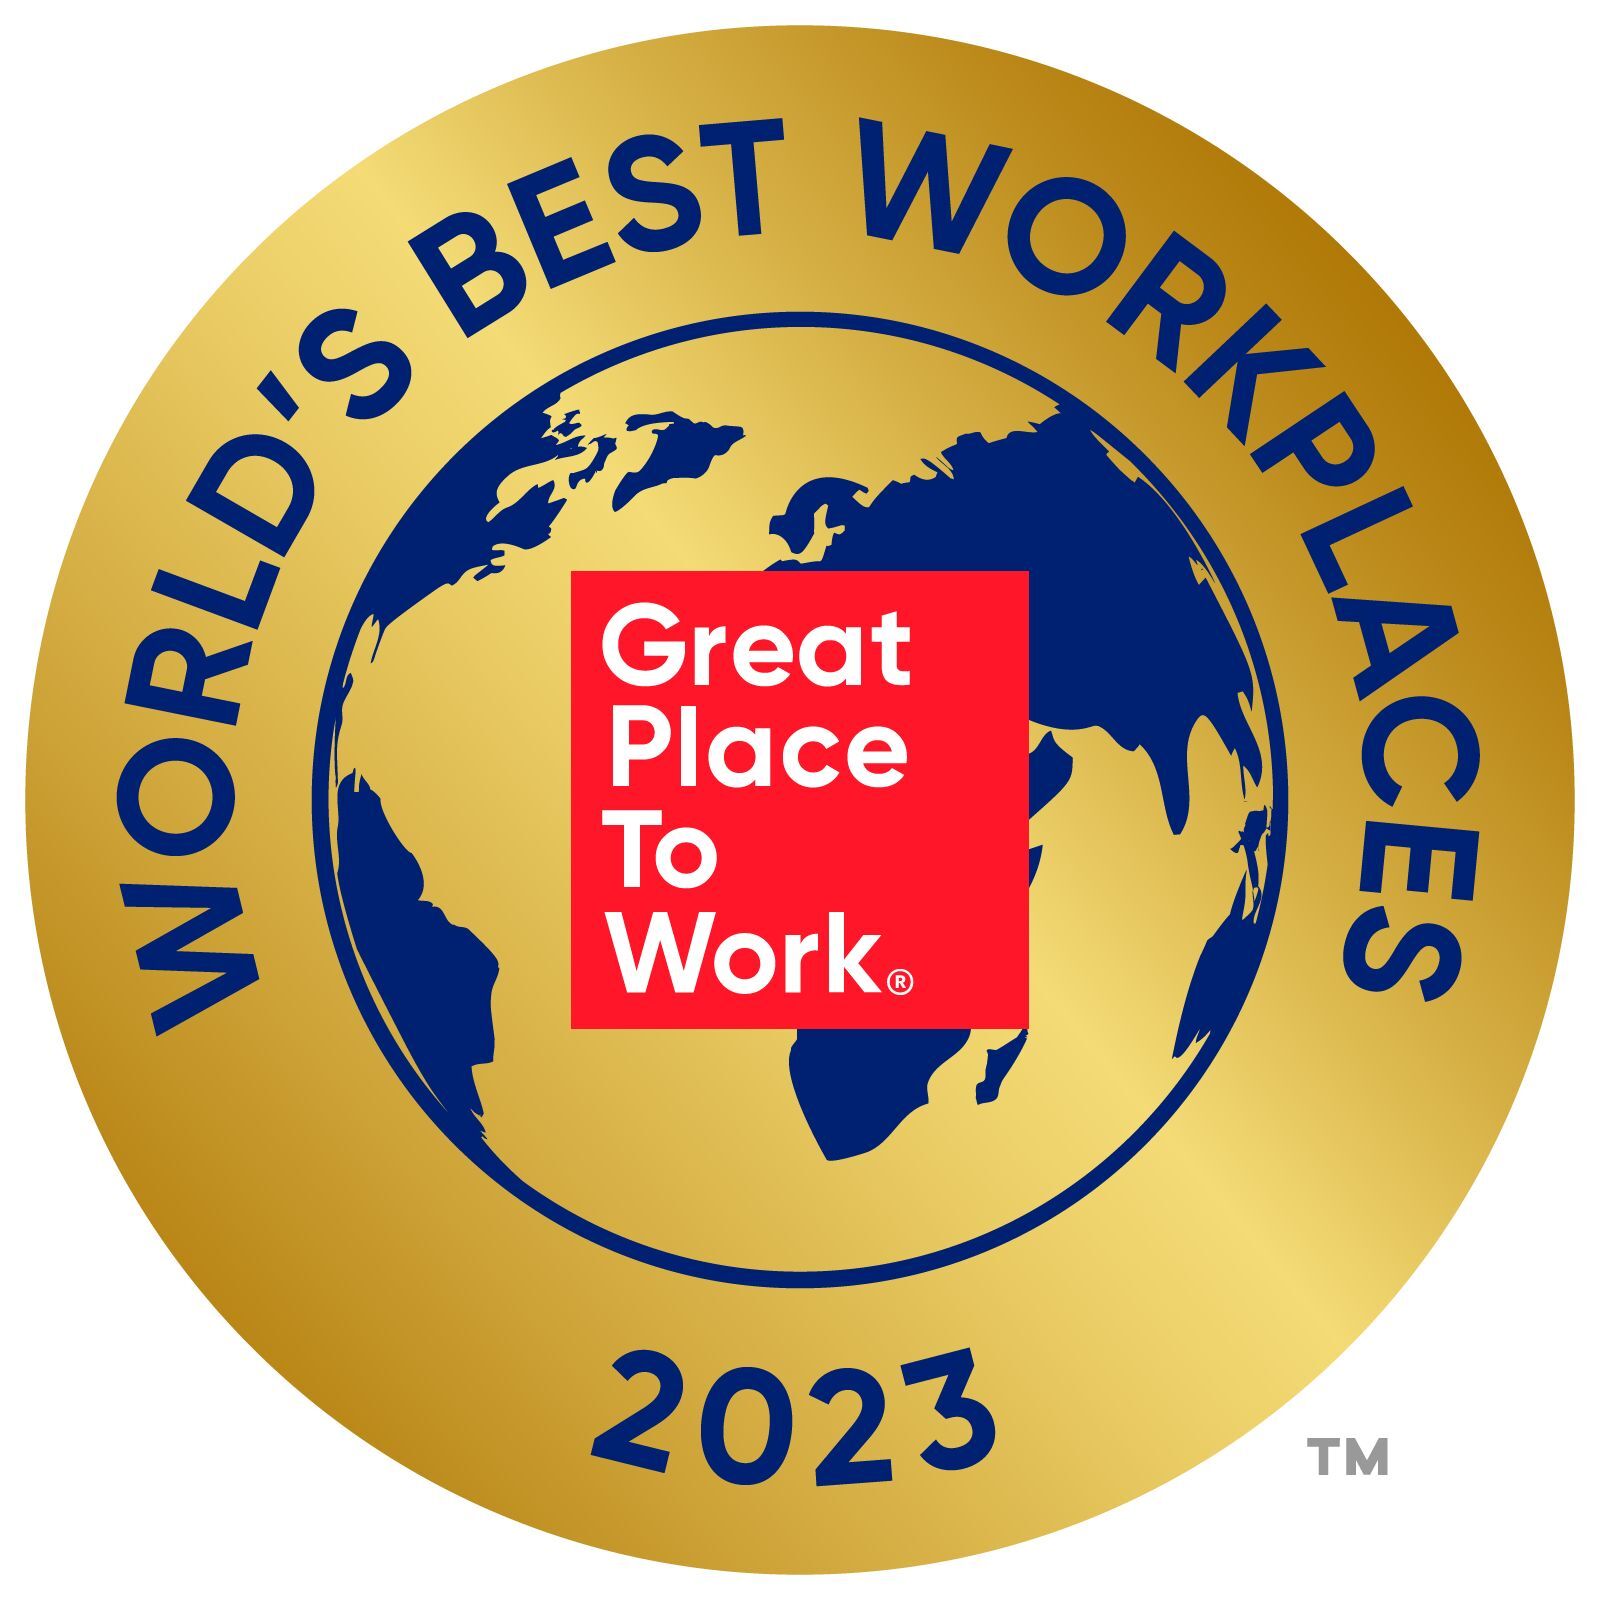 World’s Best Workplaces 2023